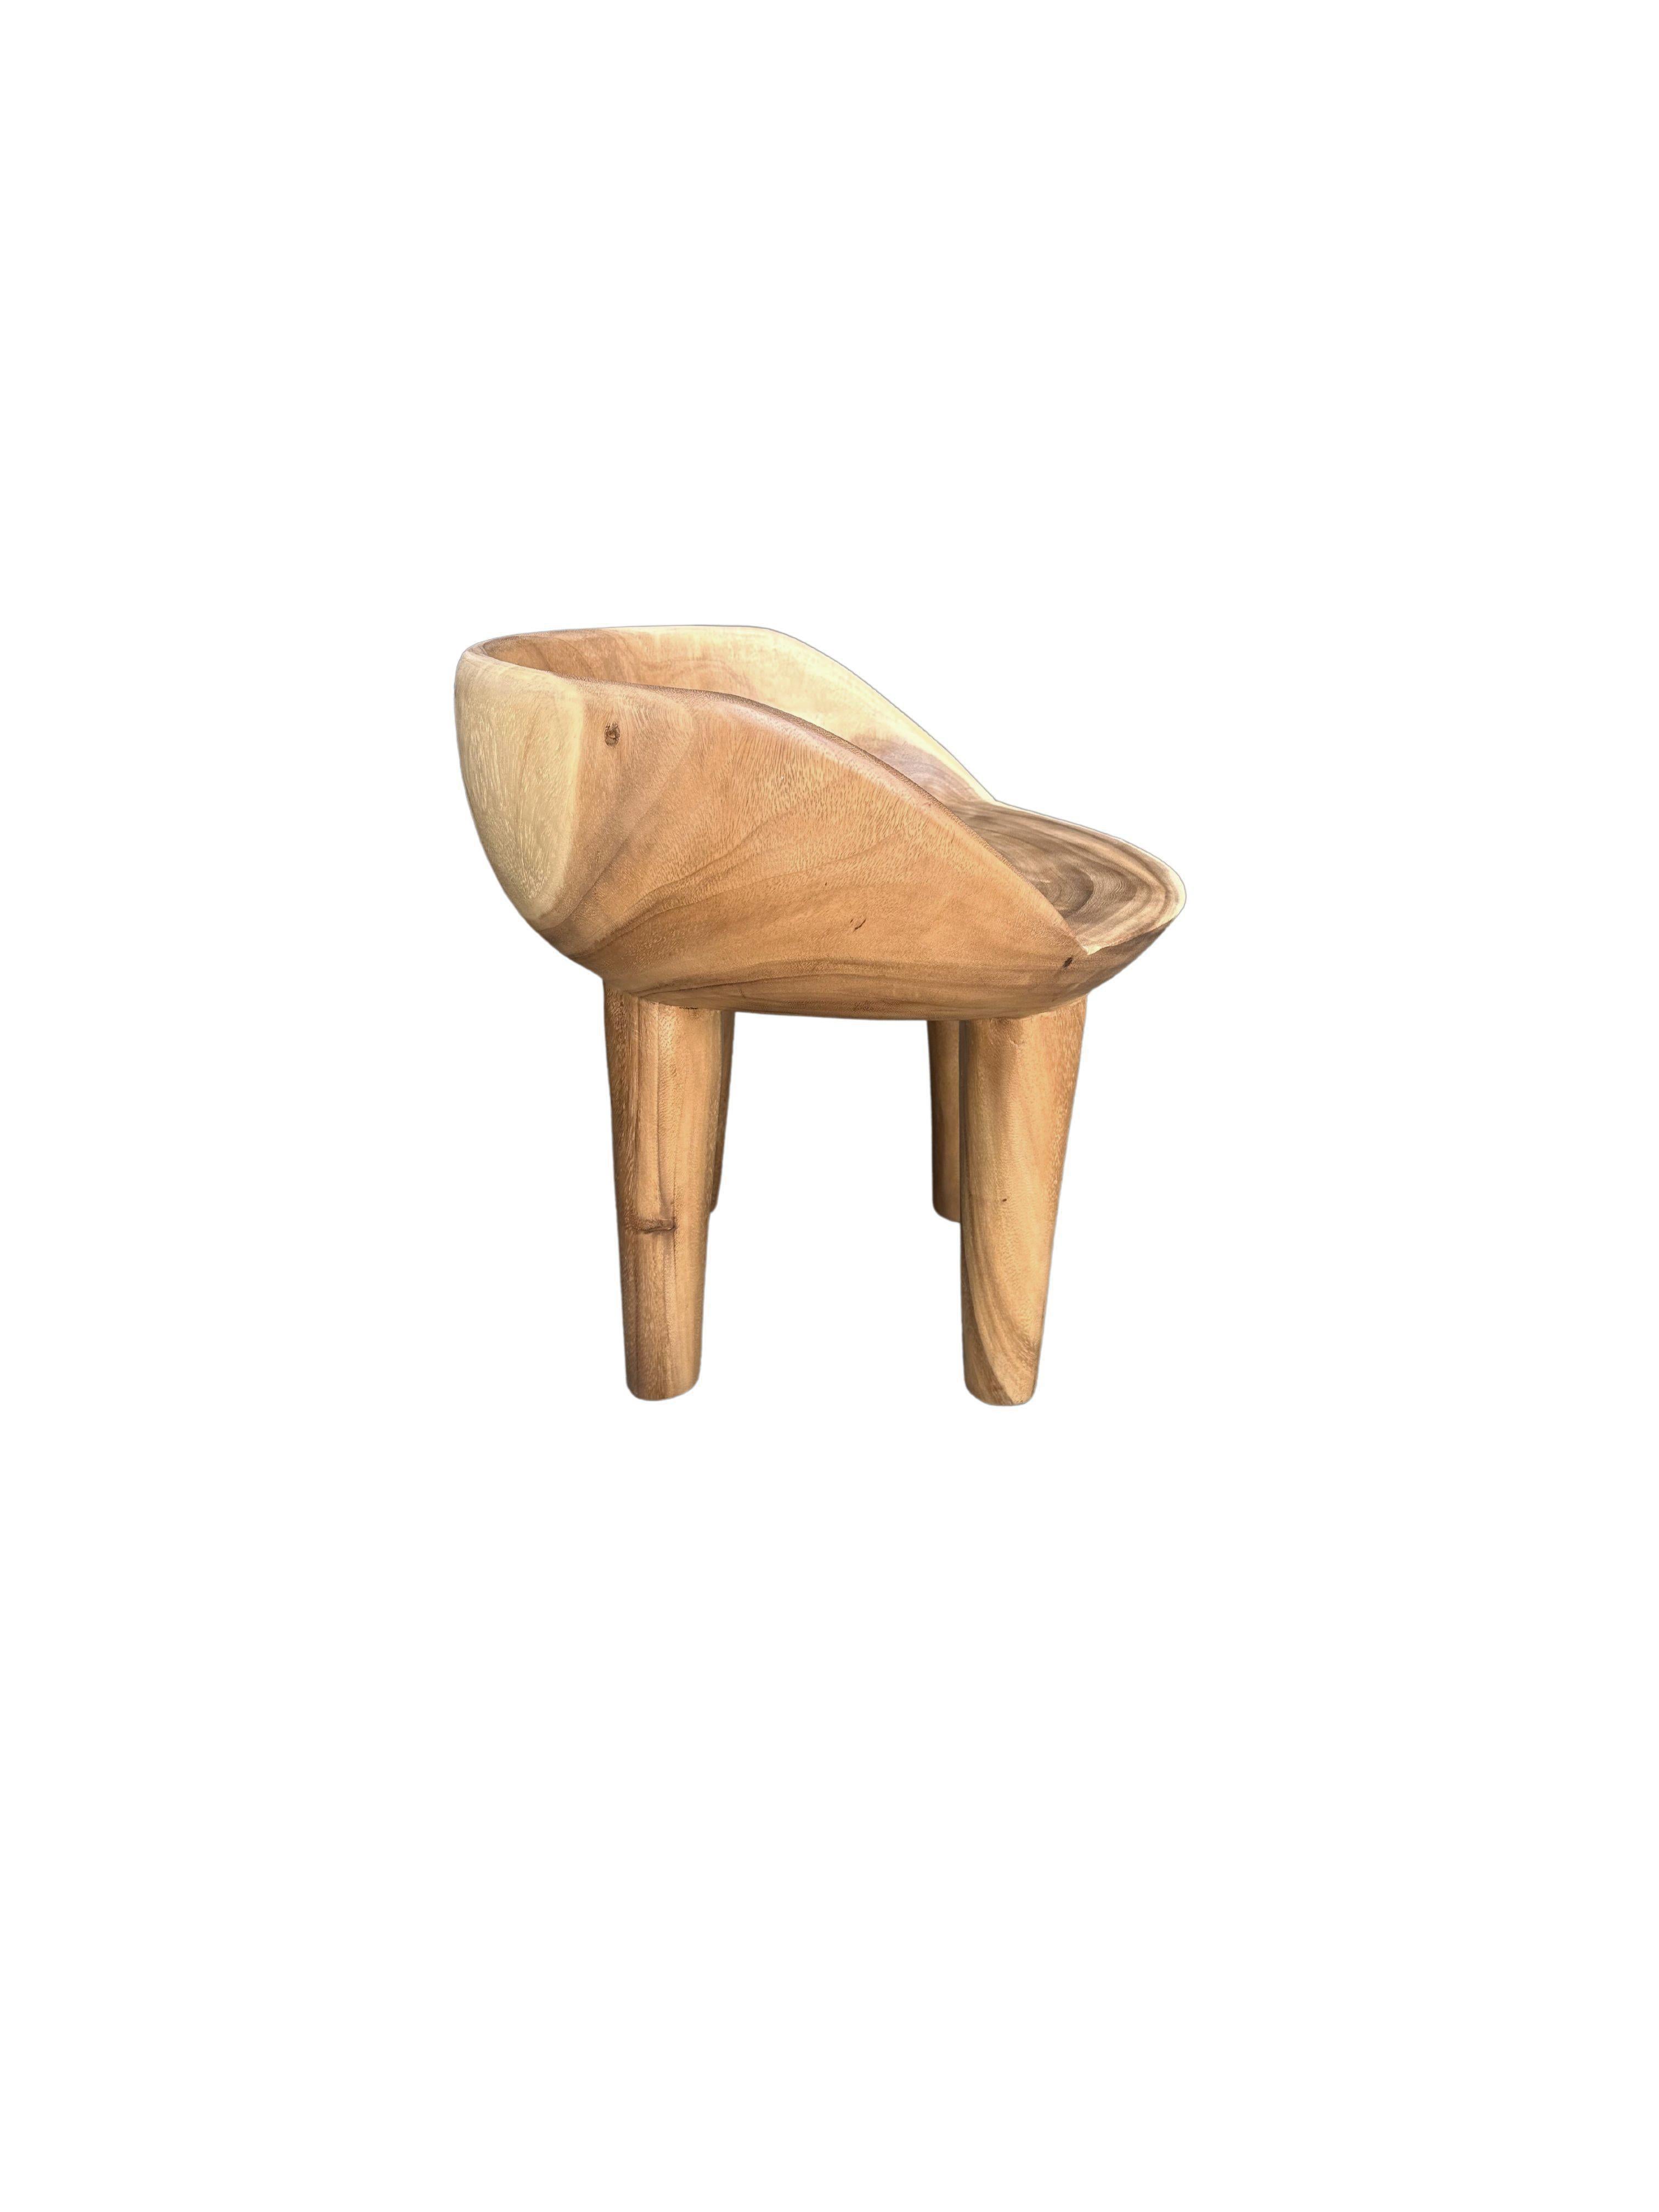 Hand-Crafted Sculptural Suar Wood Chair Modern Organic For Sale